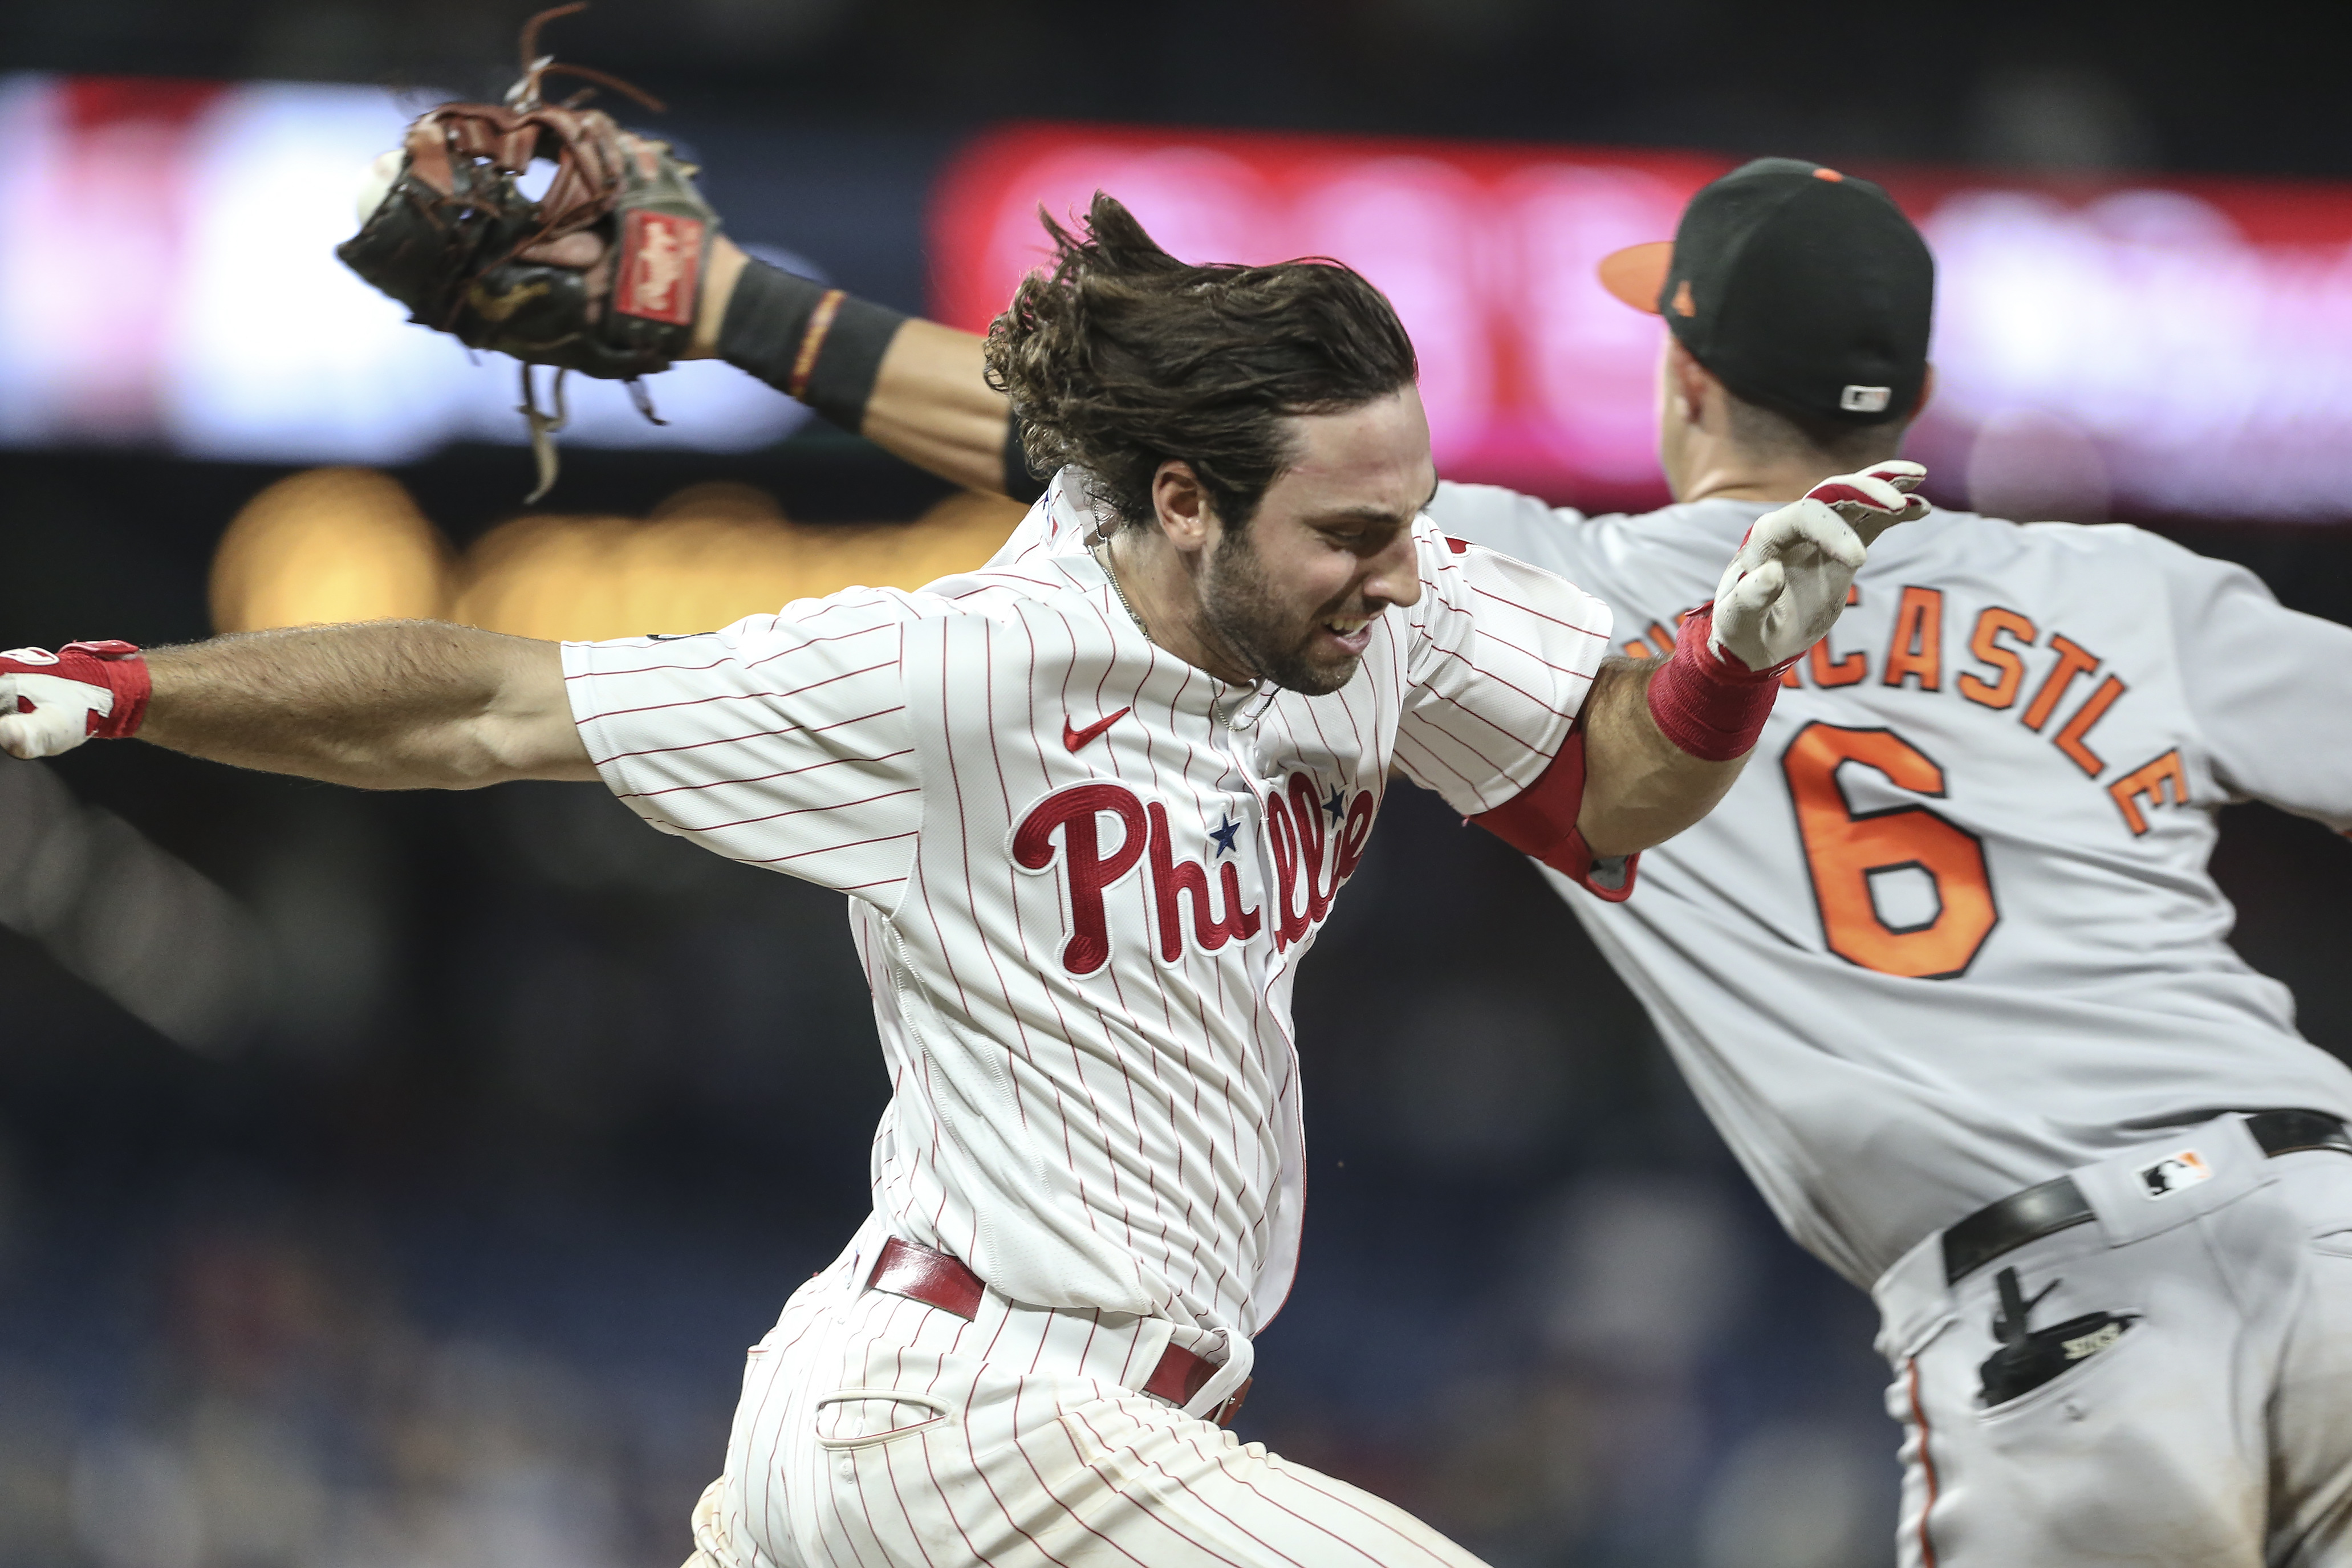 Photos of the Phillies' 4-3 walkoff win over the Orioles